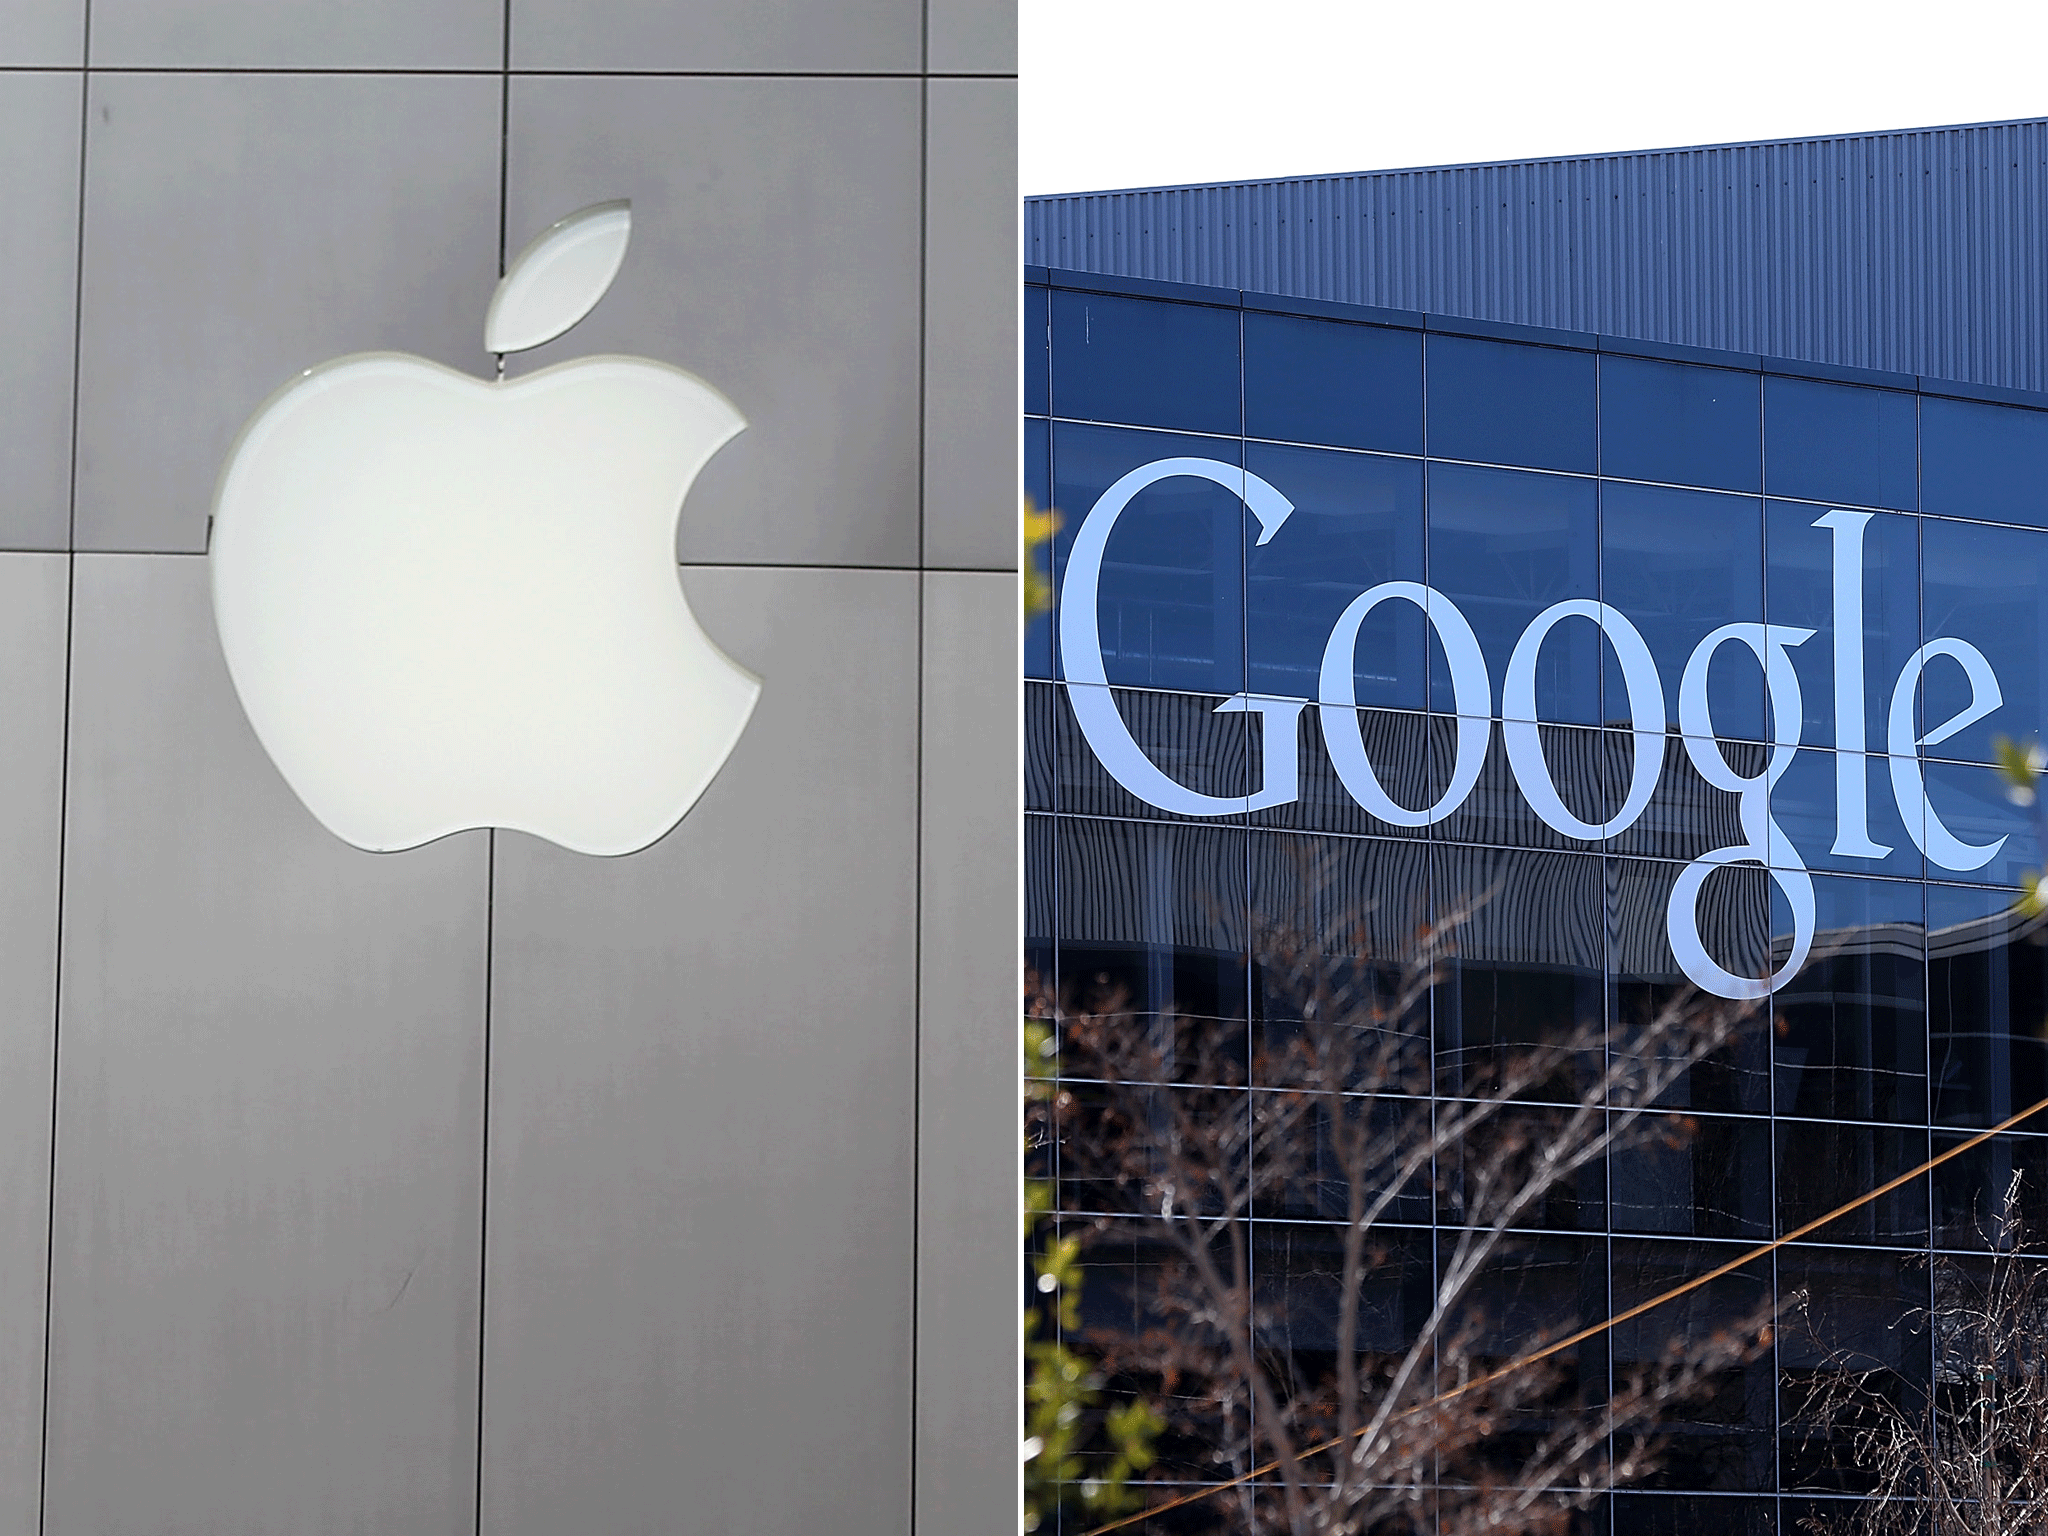 Google and Apple have been involved in an illegal agreement with dozens of other technology firms to keep their employees’ wages low